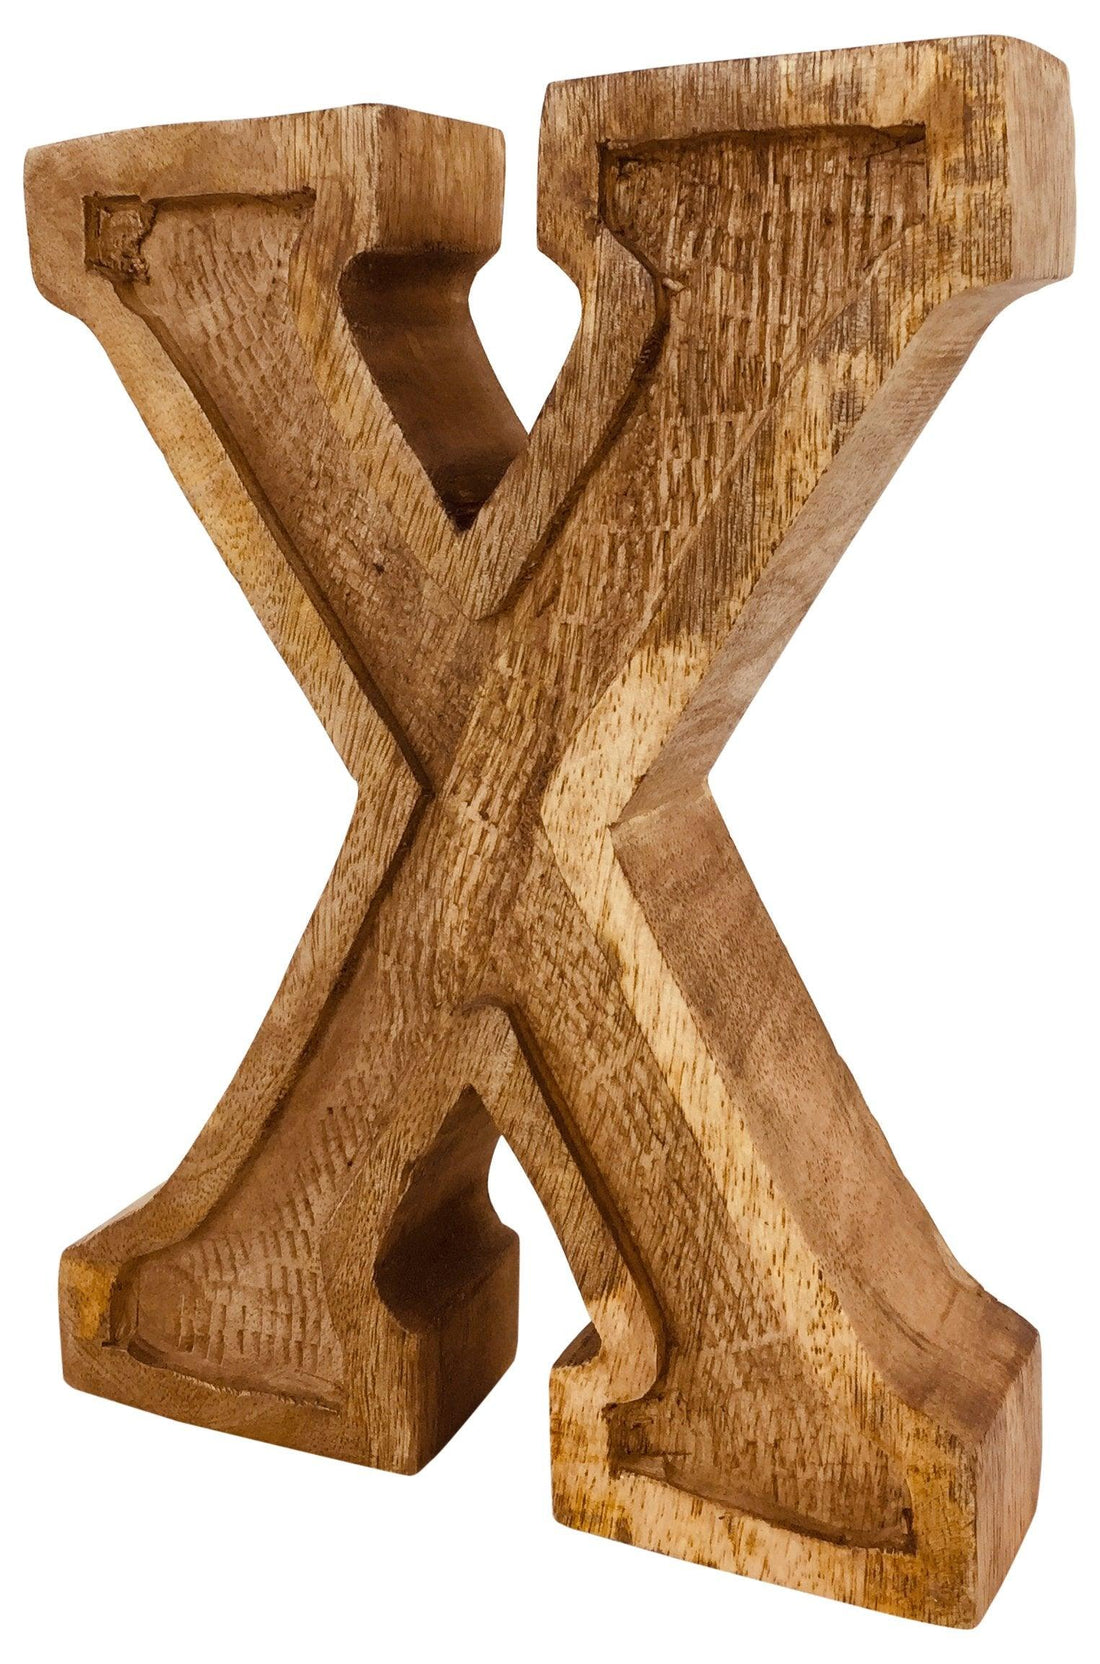 Hand Carved Wooden Embossed Letter X - £18.99 - Single Letters 